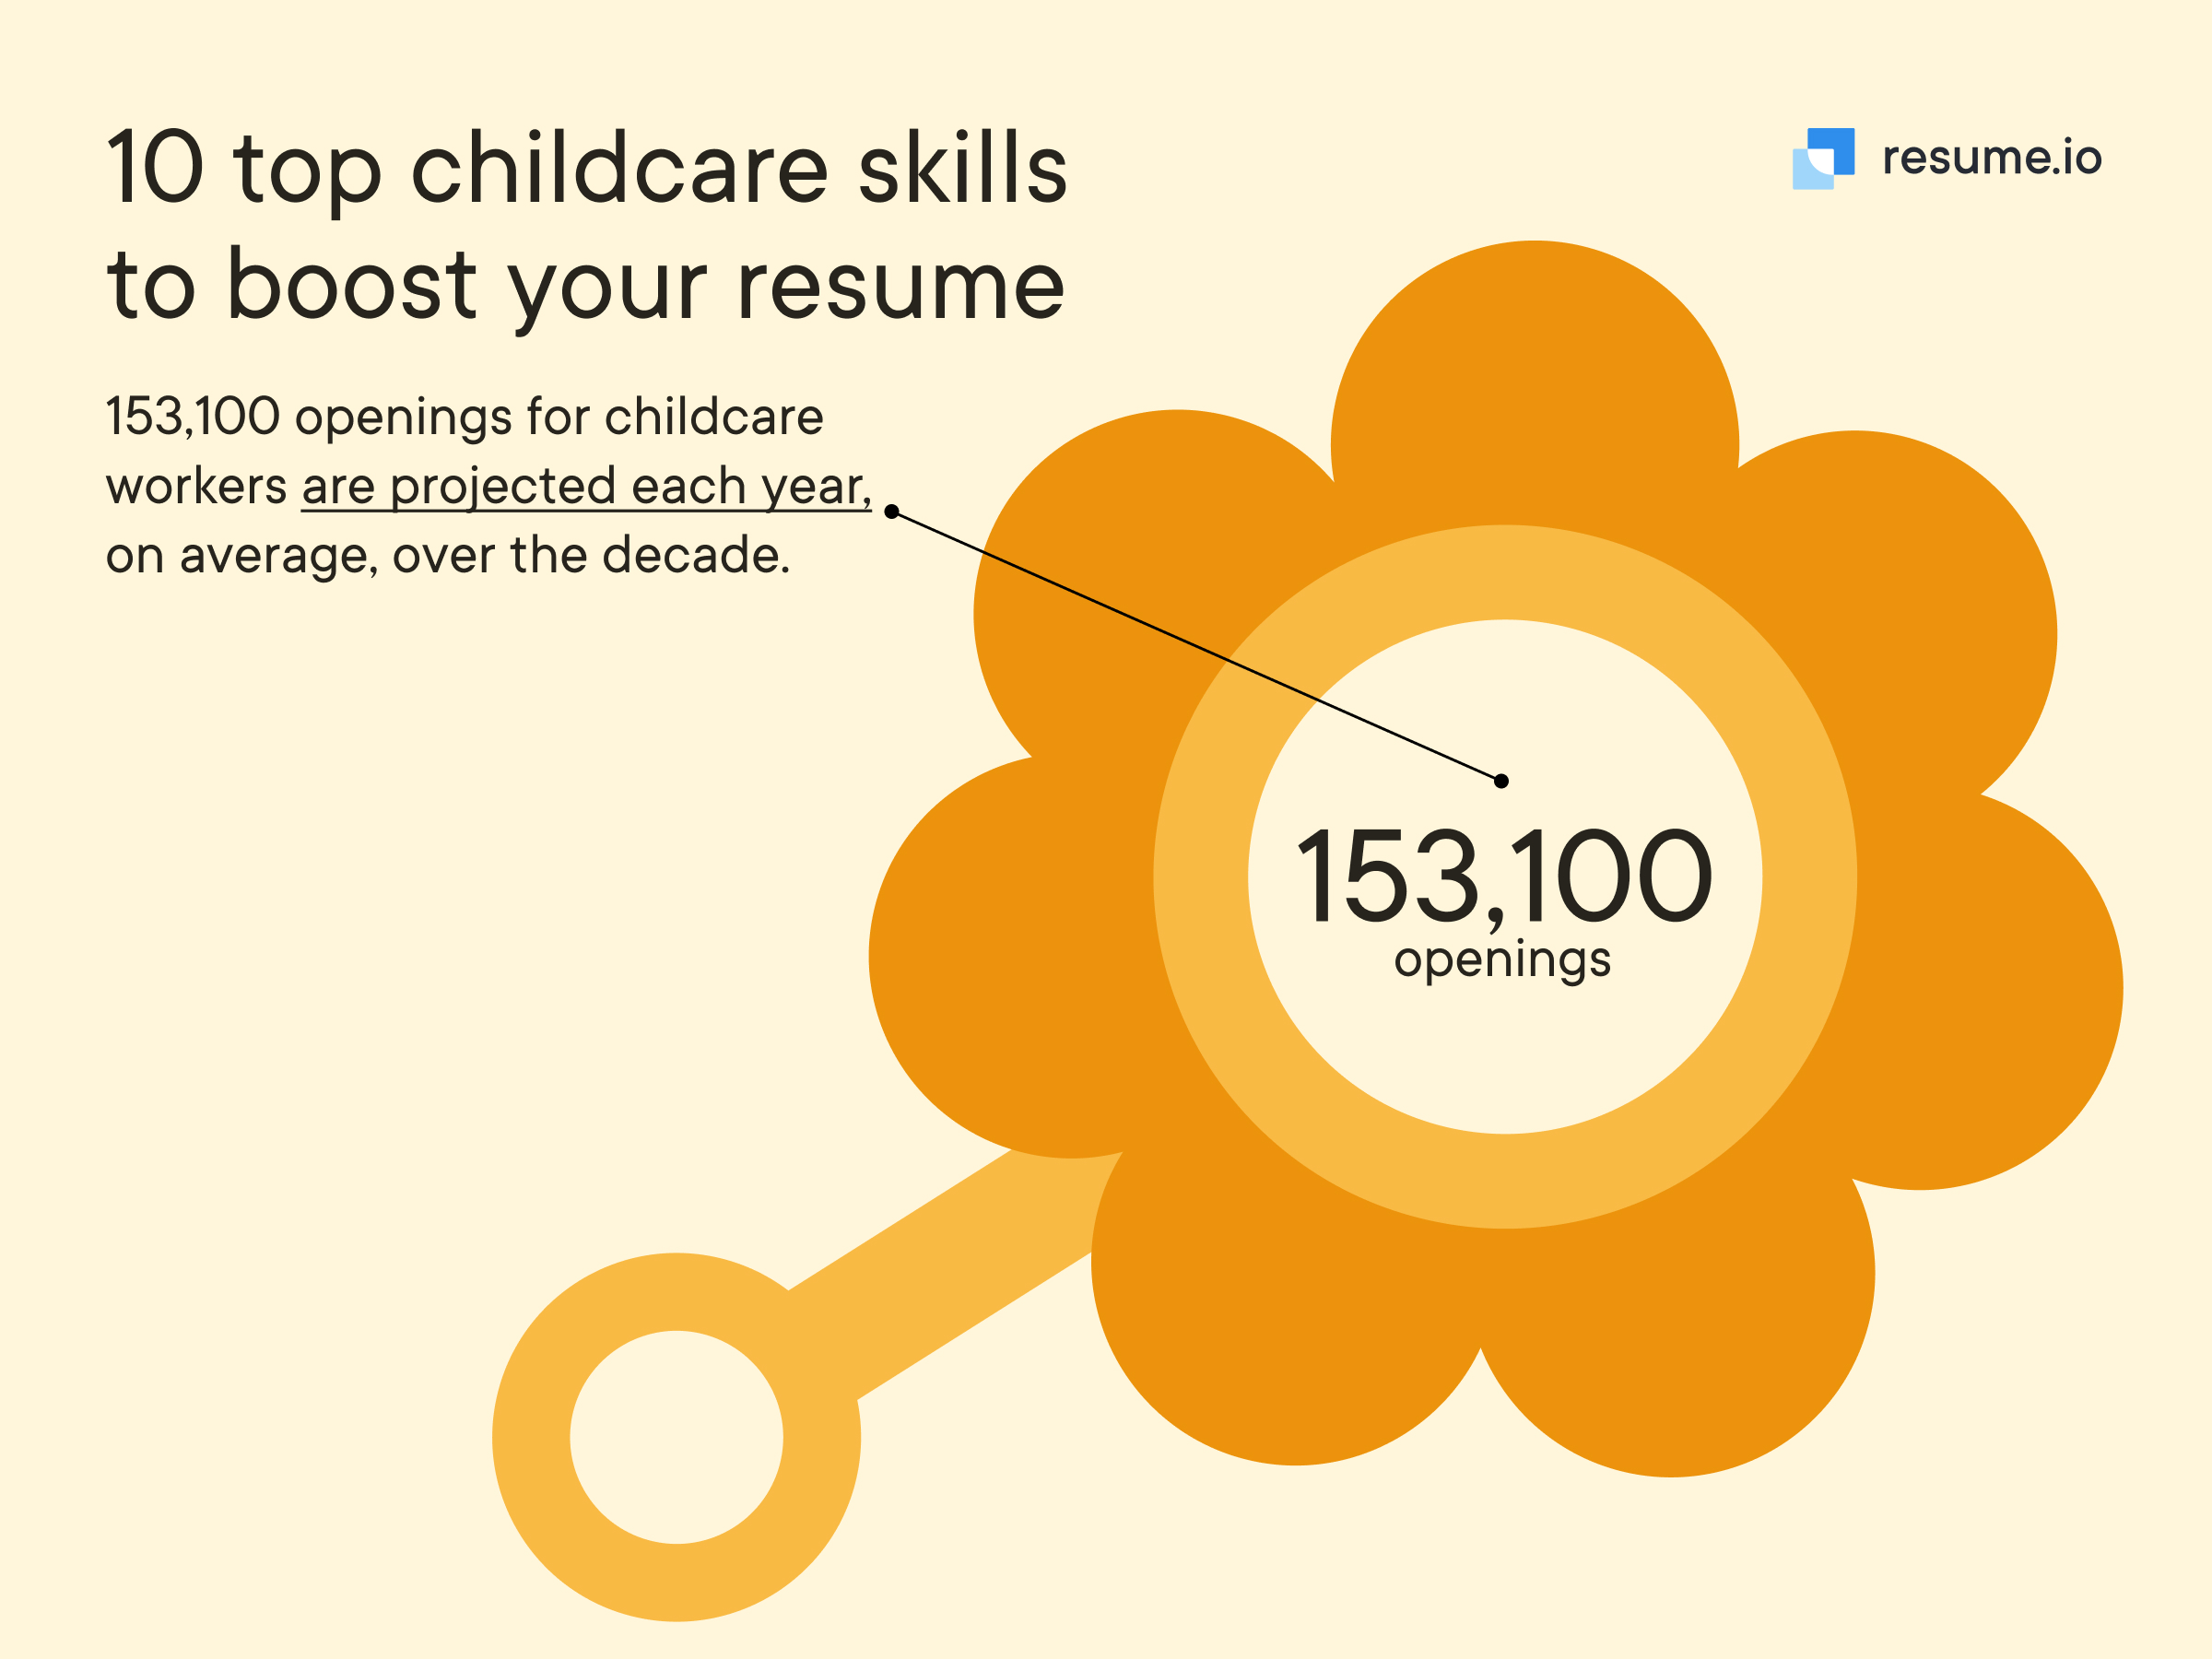 153,100 openings for childcare workers are projected each year